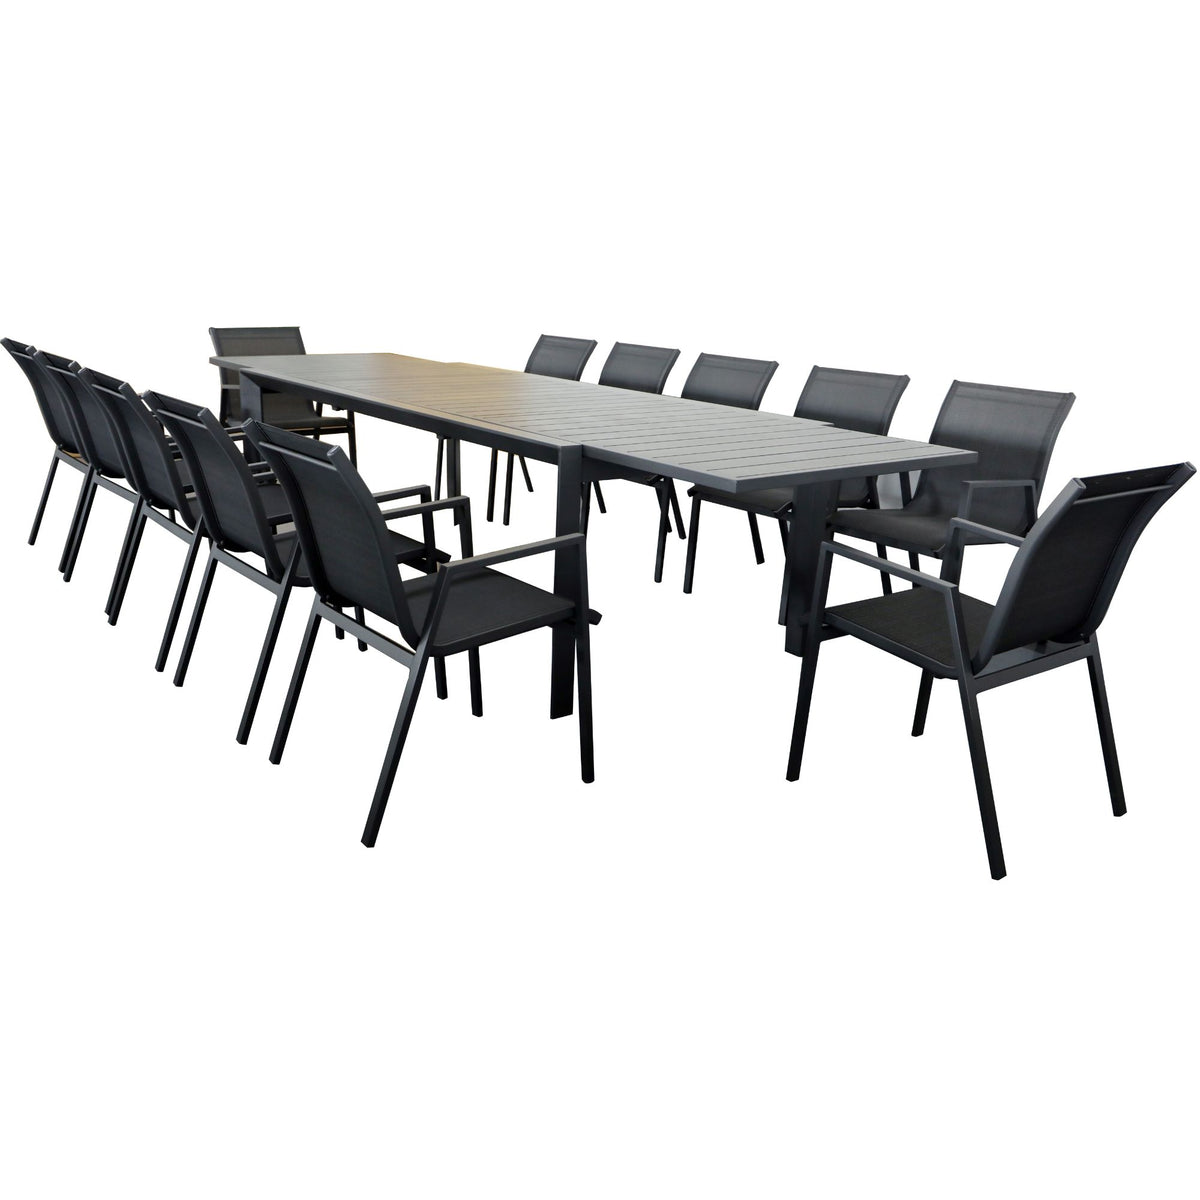 Iberia 230-345cm Outdoor Extensible Dining Table Charcoal 